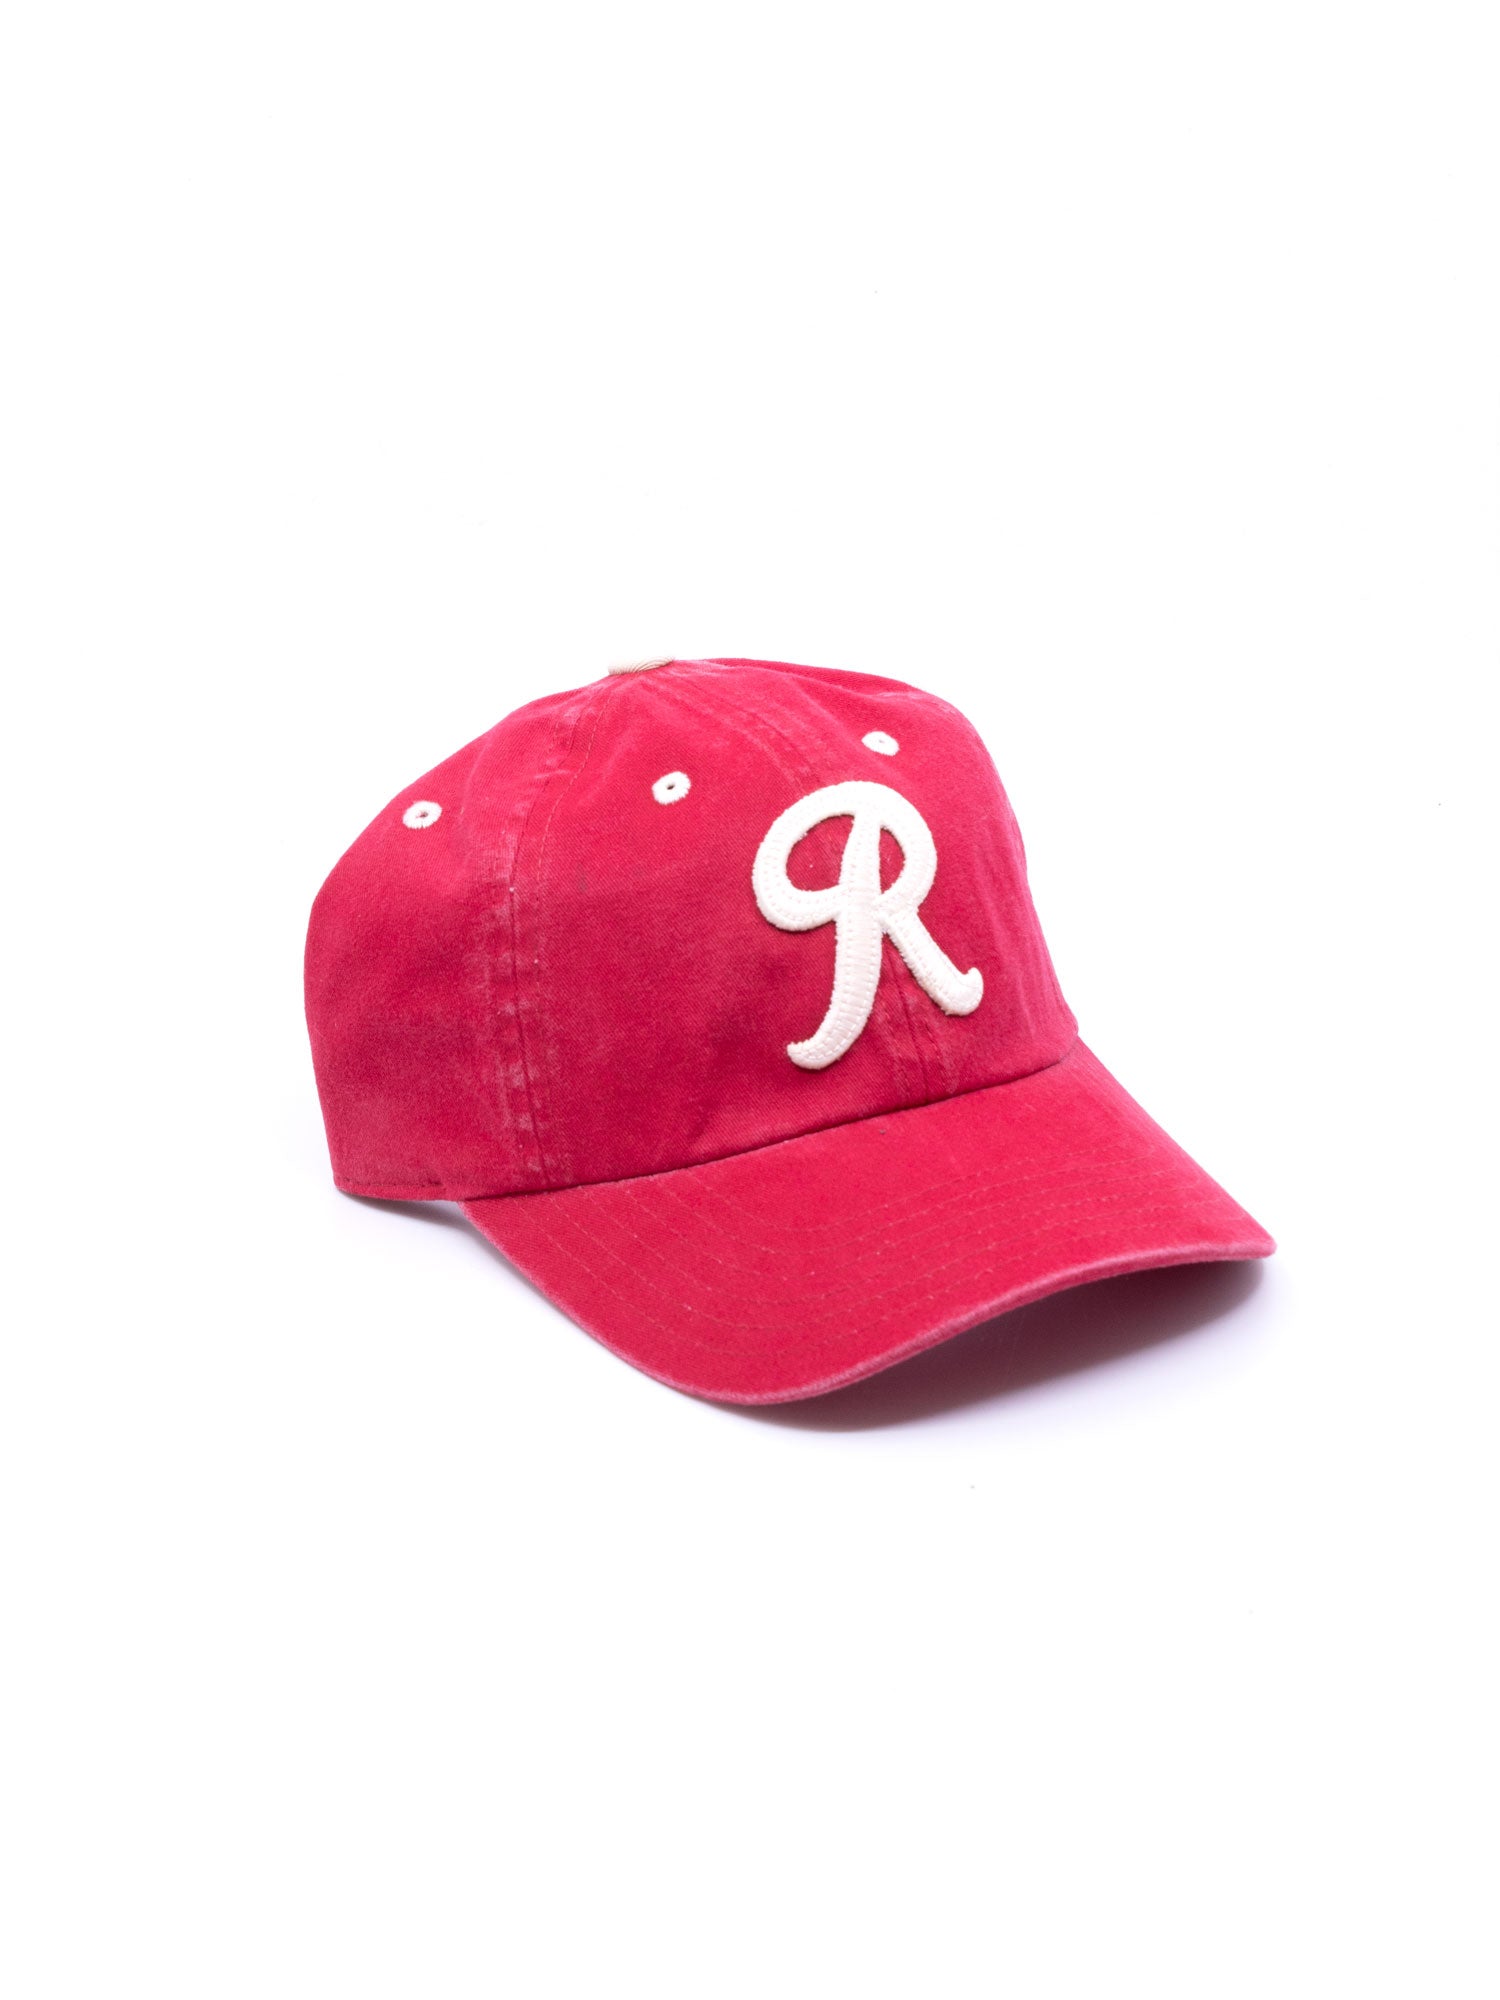 Seattle Rainiers Adjustable Archive Hat by American Needle